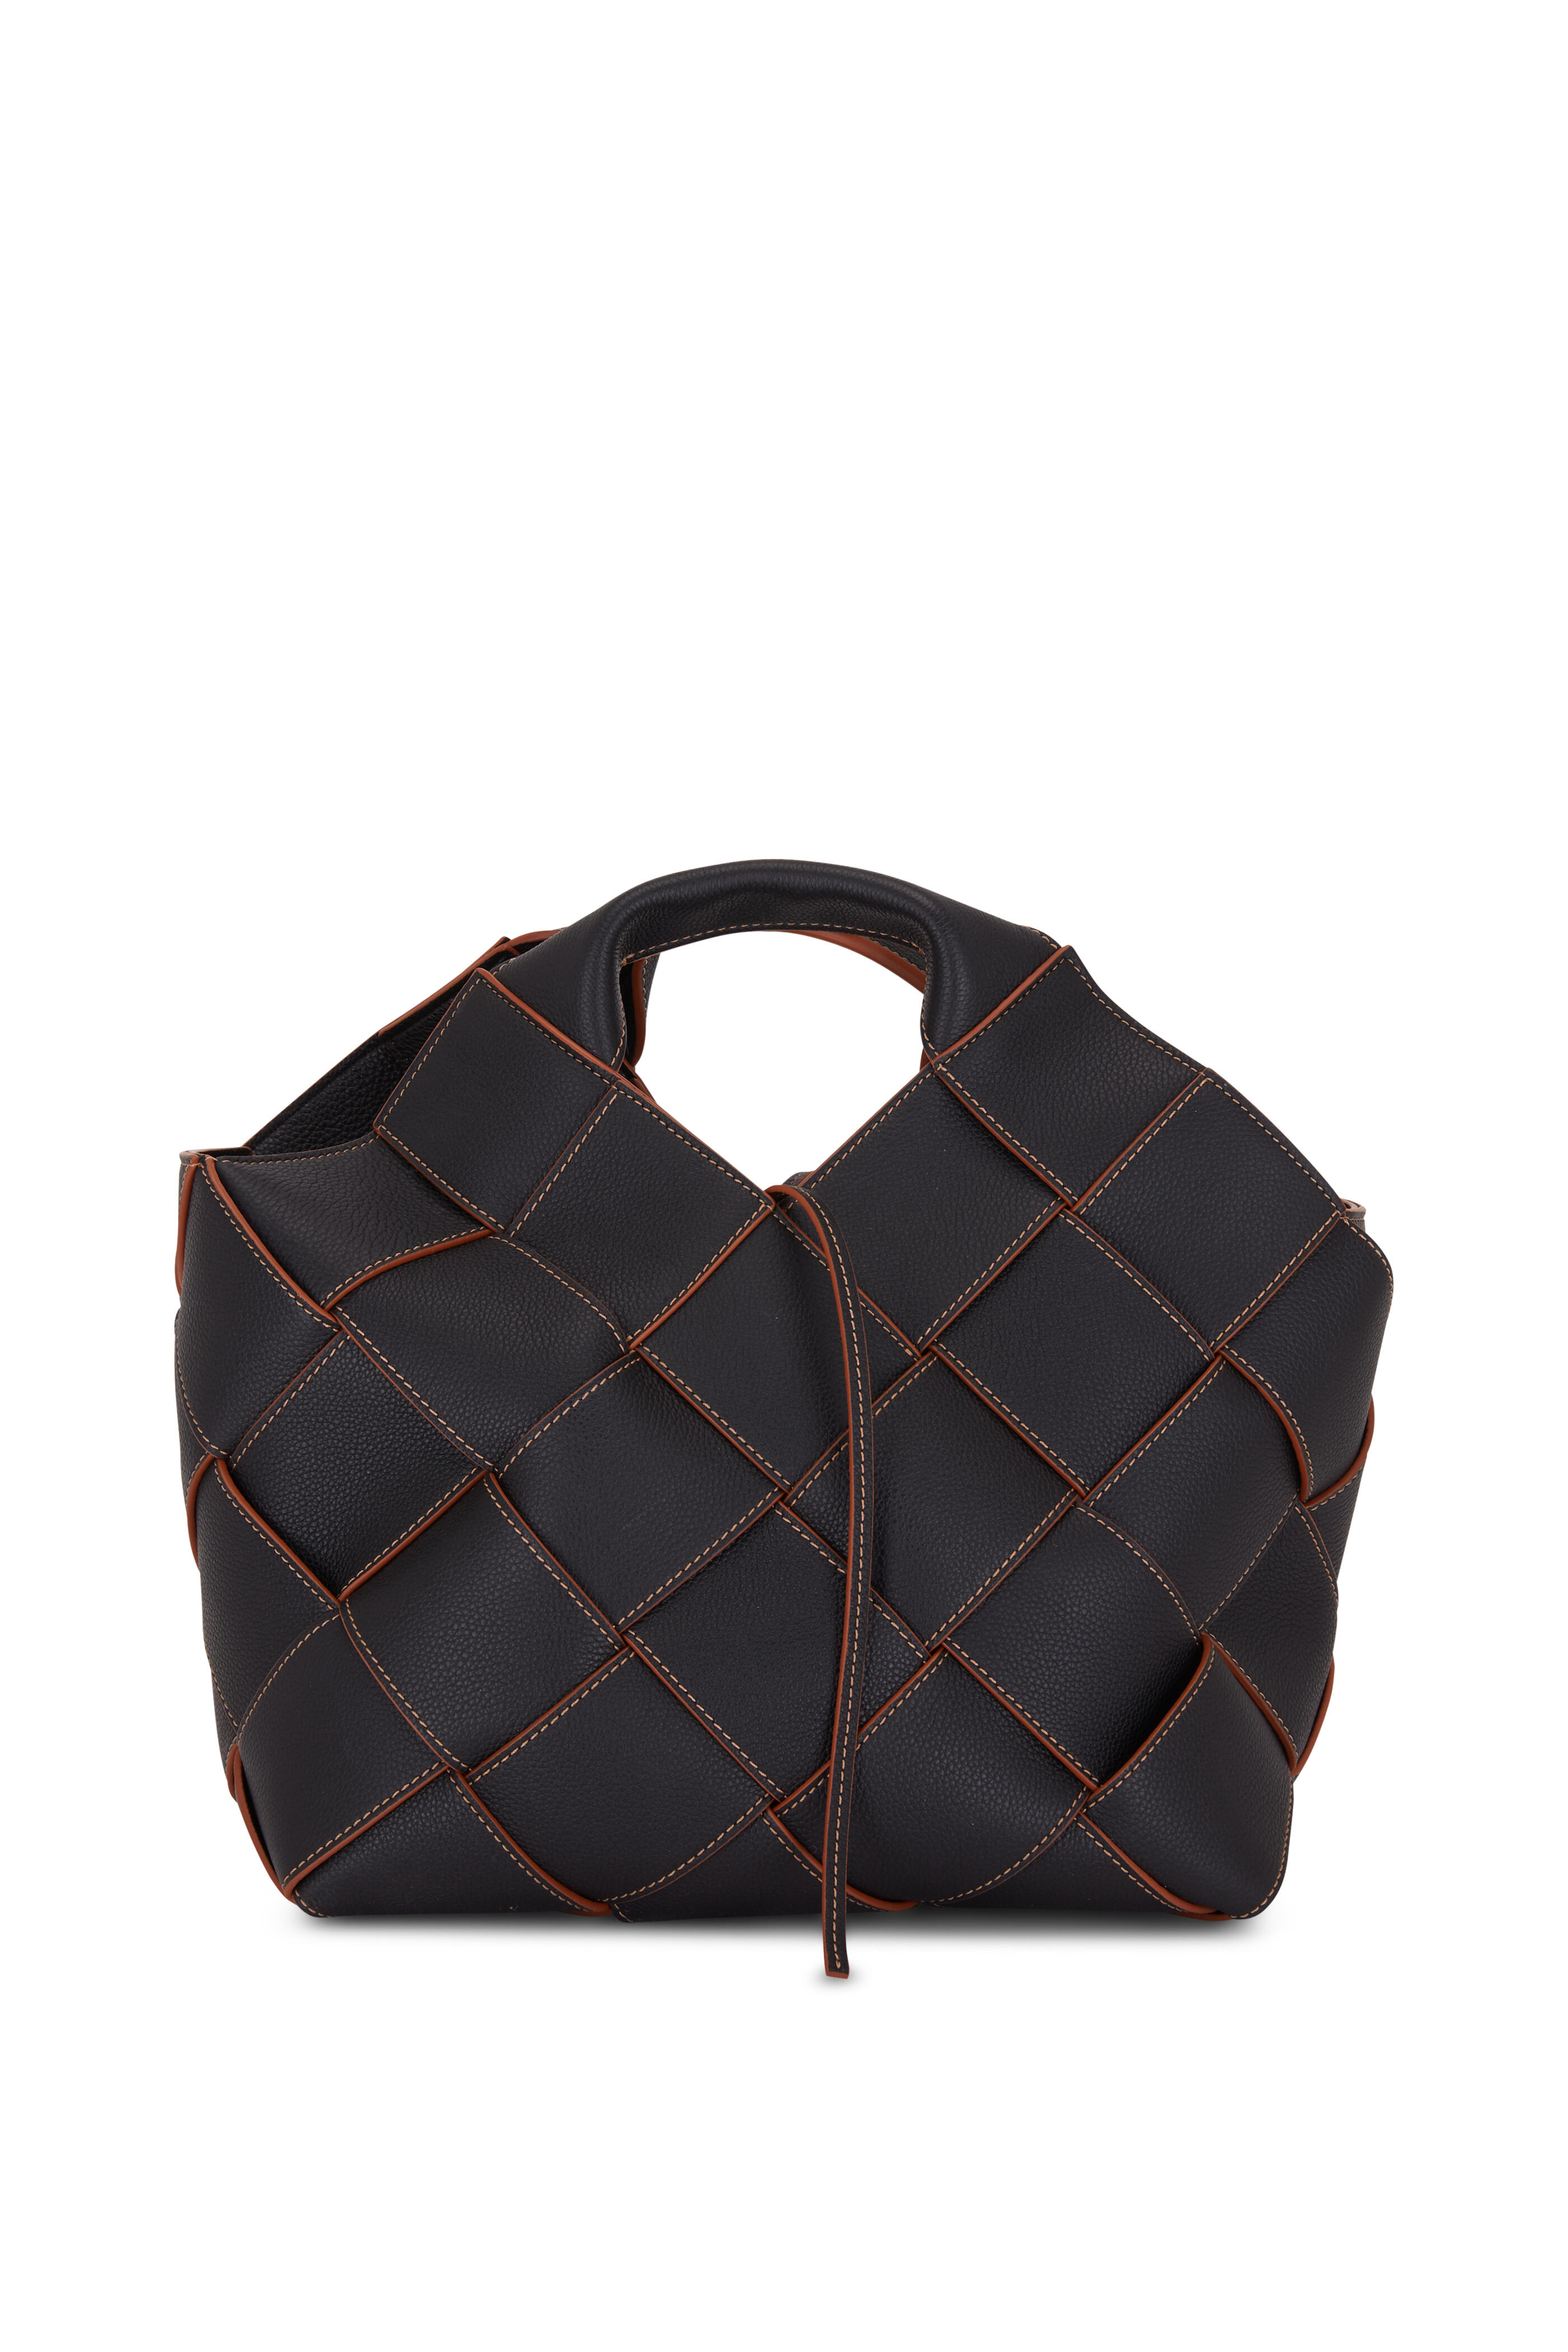 Loewe Large Basket Bag in Palm Leaf and Calfskin, Beige, * Inventory Confirmation Required